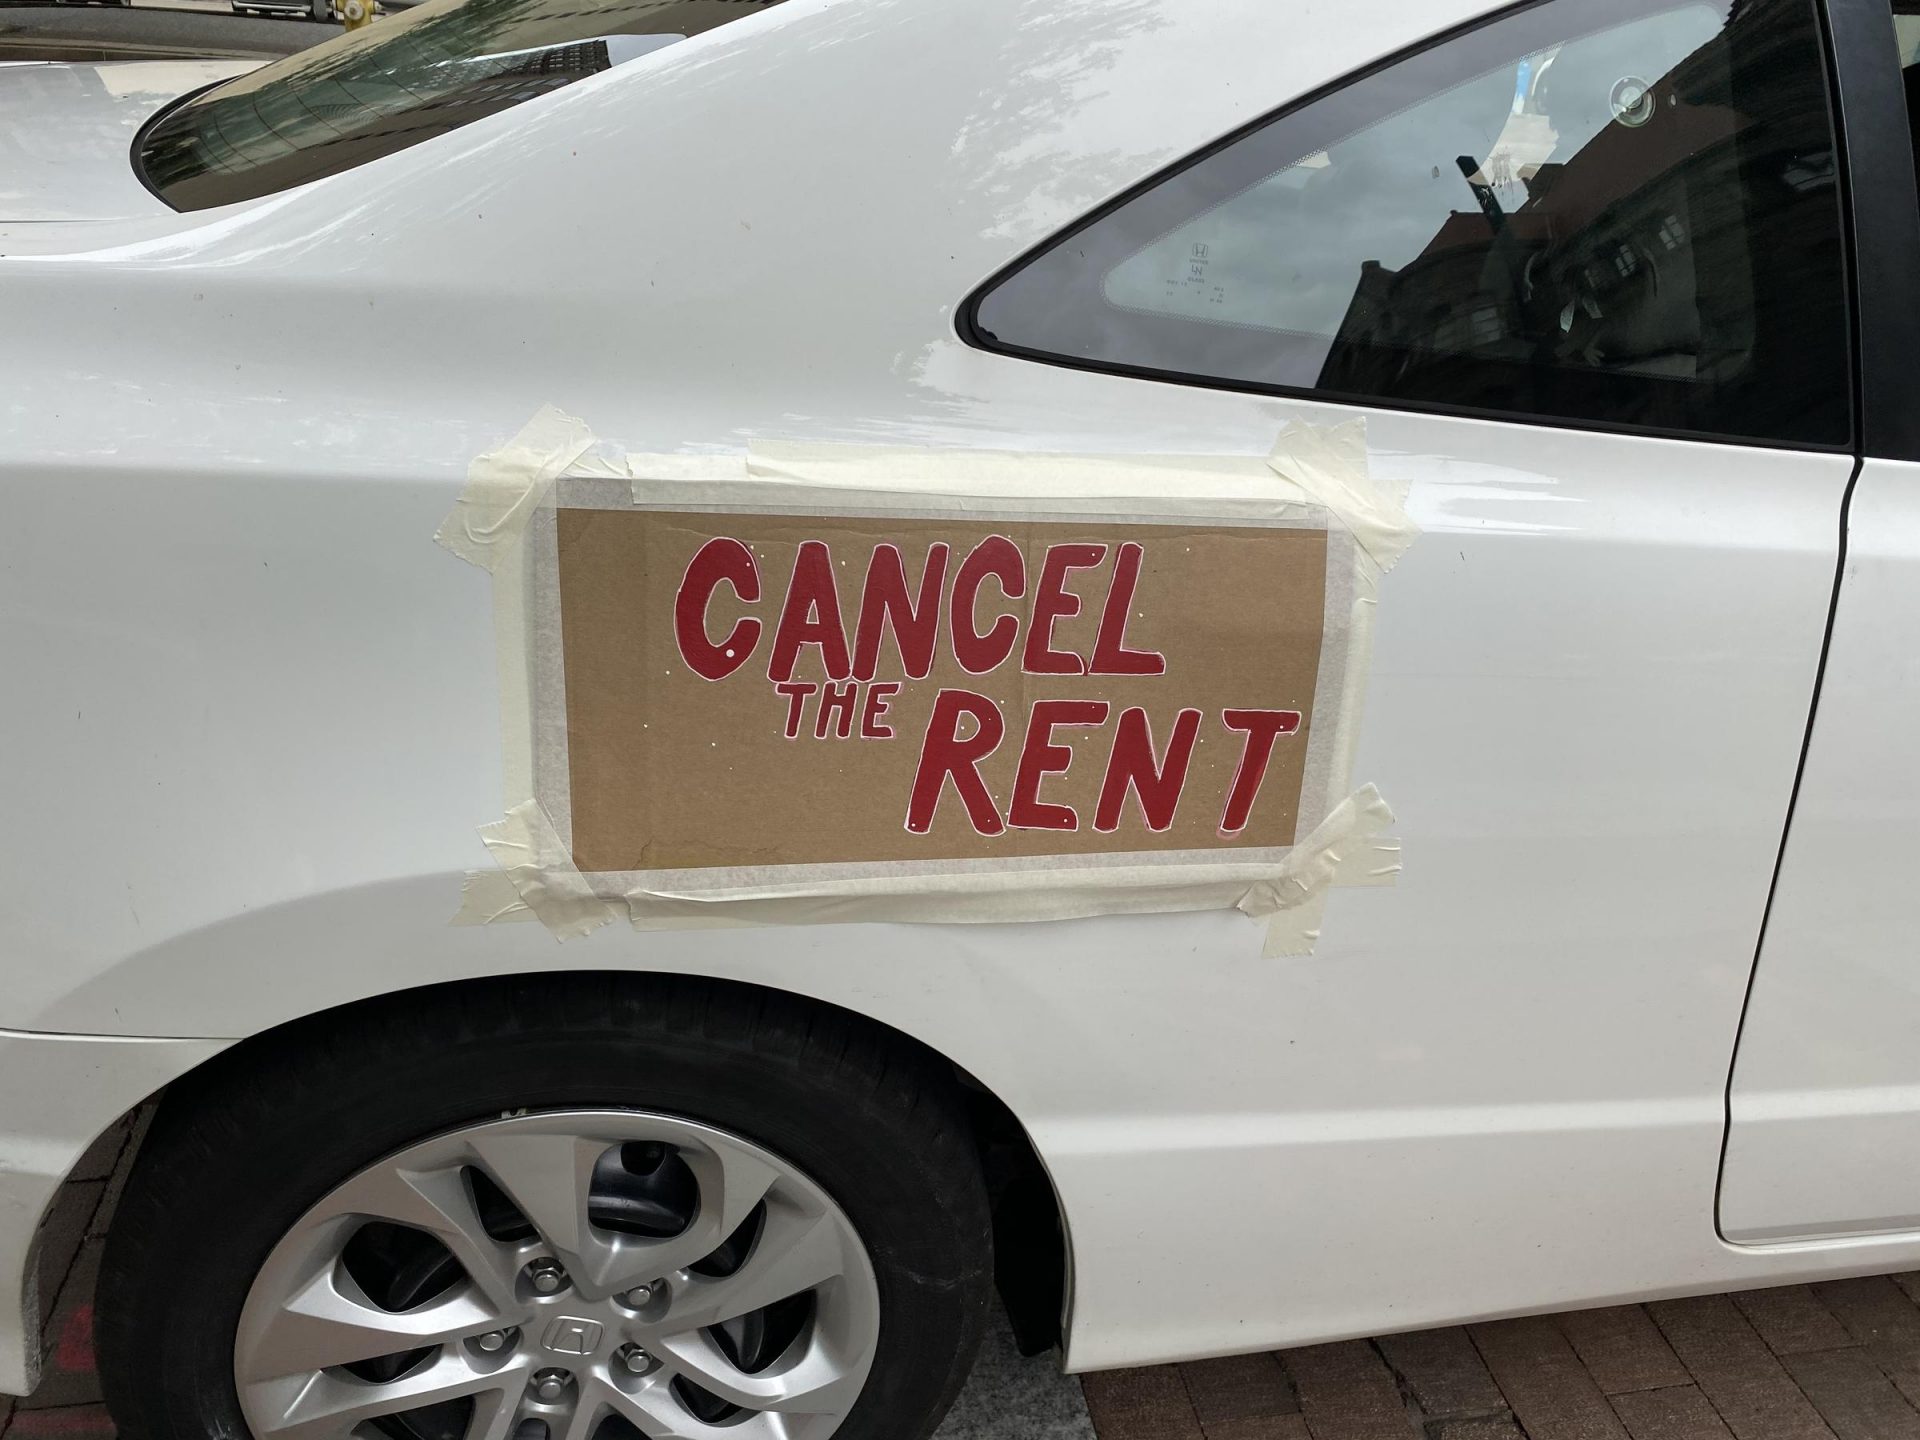 A "cancel the rent" sign is seen on a car at a rally to extend an eviction moratorium in downtown Pittsburgh on Monday, Aug. 31, 2020.